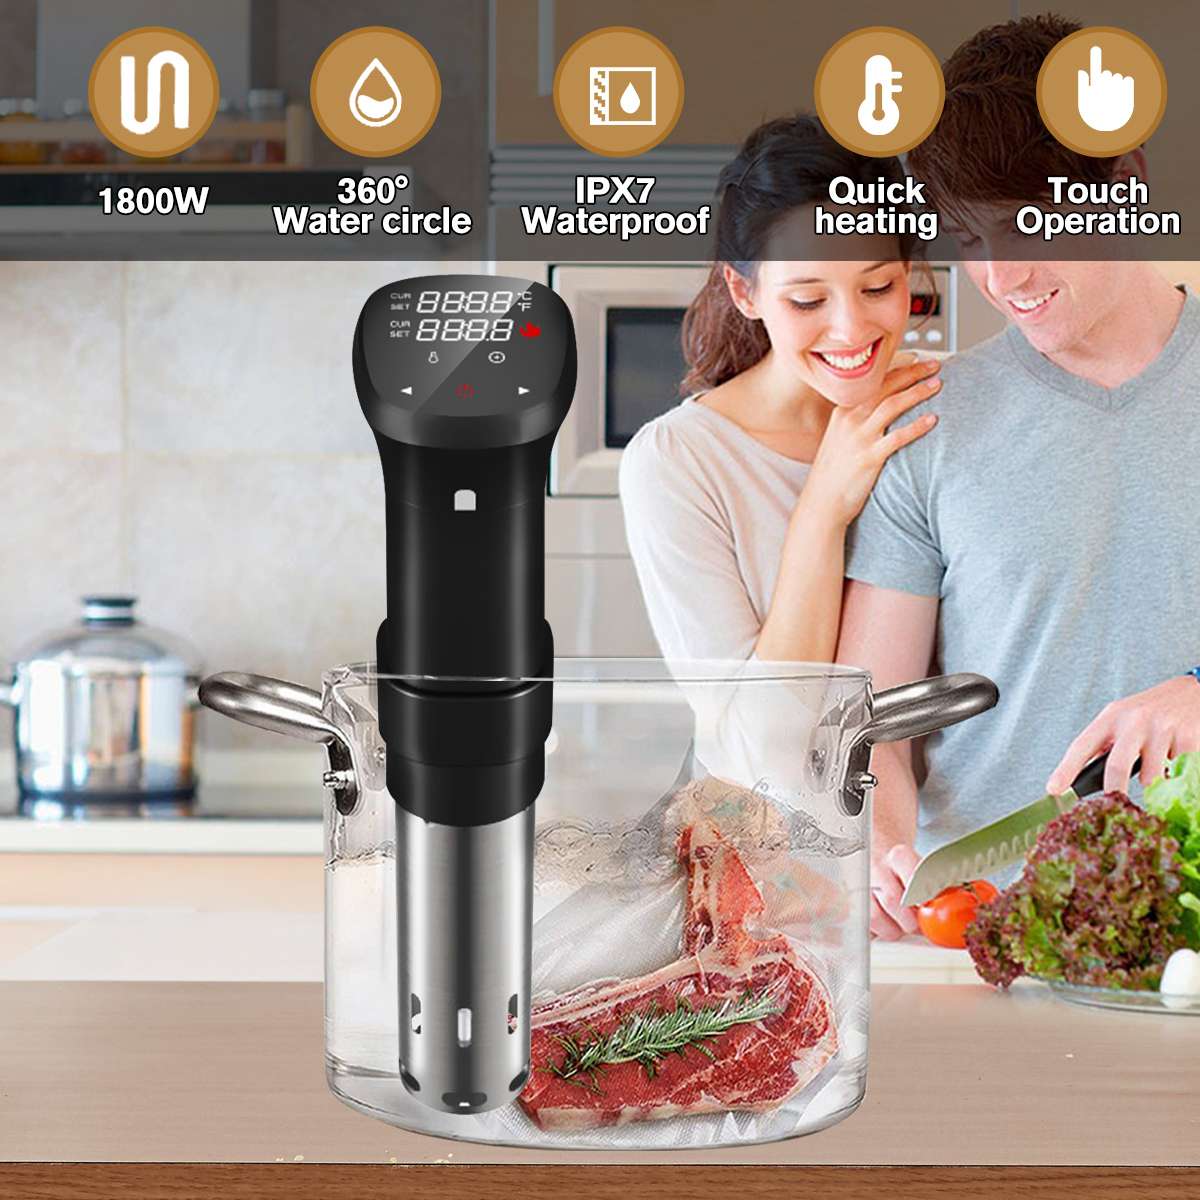 https://cntronic.com/data/product-desc/original/ila-2255800964142952-augienb-ipx7-waterproof-1800w-lcd-touch-sous-vide-cooker-cooking-machine-sturdy-immersion-circulator-accurate-slow-cooker3.jpg